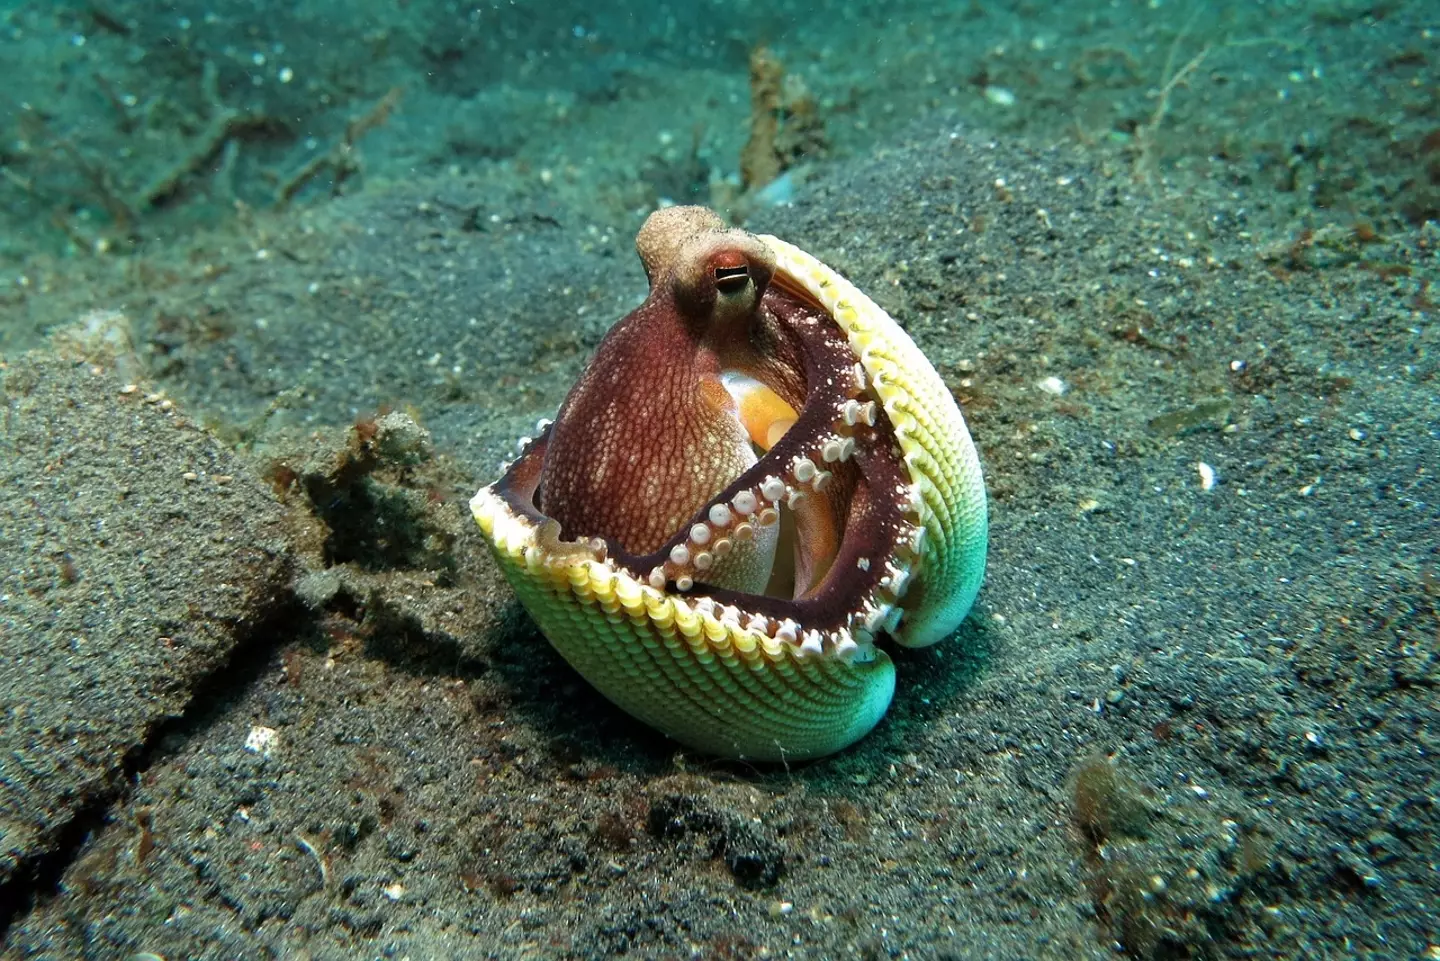 An octopus using a shell for protection or hunting.